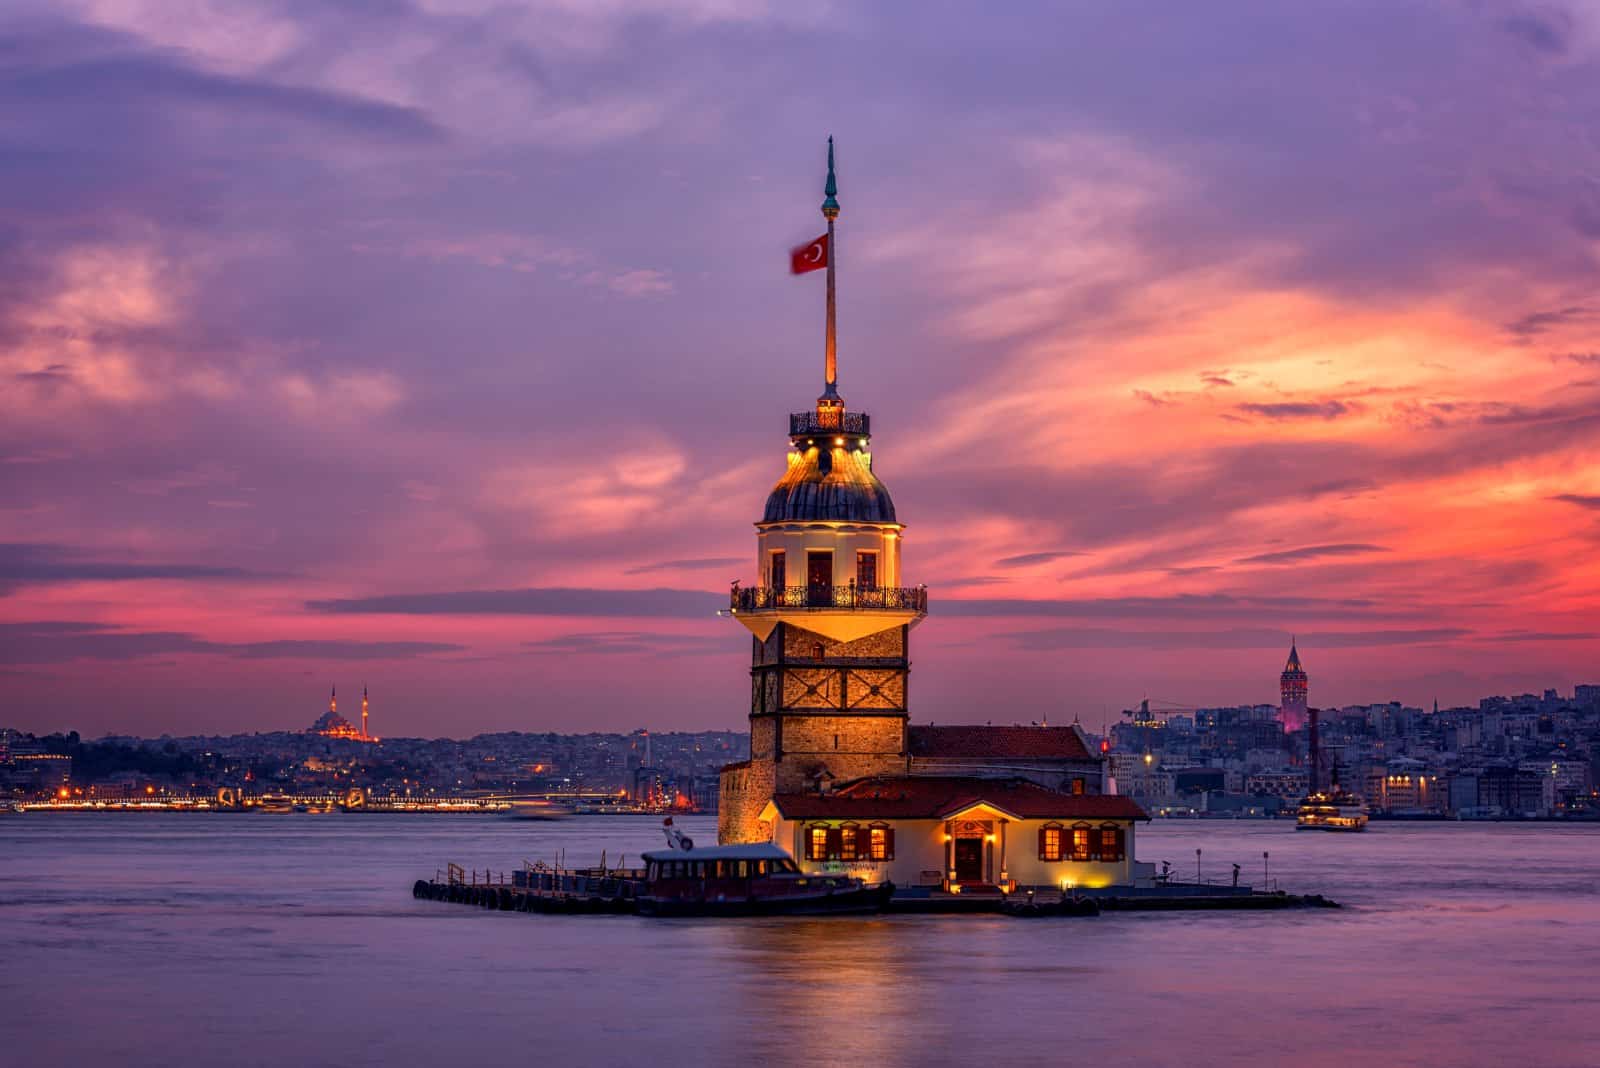 <p class="wp-caption-text">Image Credit: Shutterstock / Uhryn Larysa</p>  <p><span>A cruise on the Bosphorus Strait is an essential Istanbul experience, offering views of palaces, mosques, and mansions lining the shores of this narrow waterway that divides Europe and Asia. Various cruise options range from short hops on public ferries to private yacht tours. A Bosphorus cruise provides a unique vantage point of the city’s skyline and a deeper understanding of Istanbul’s strategic and cultural significance throughout history.</span></p>